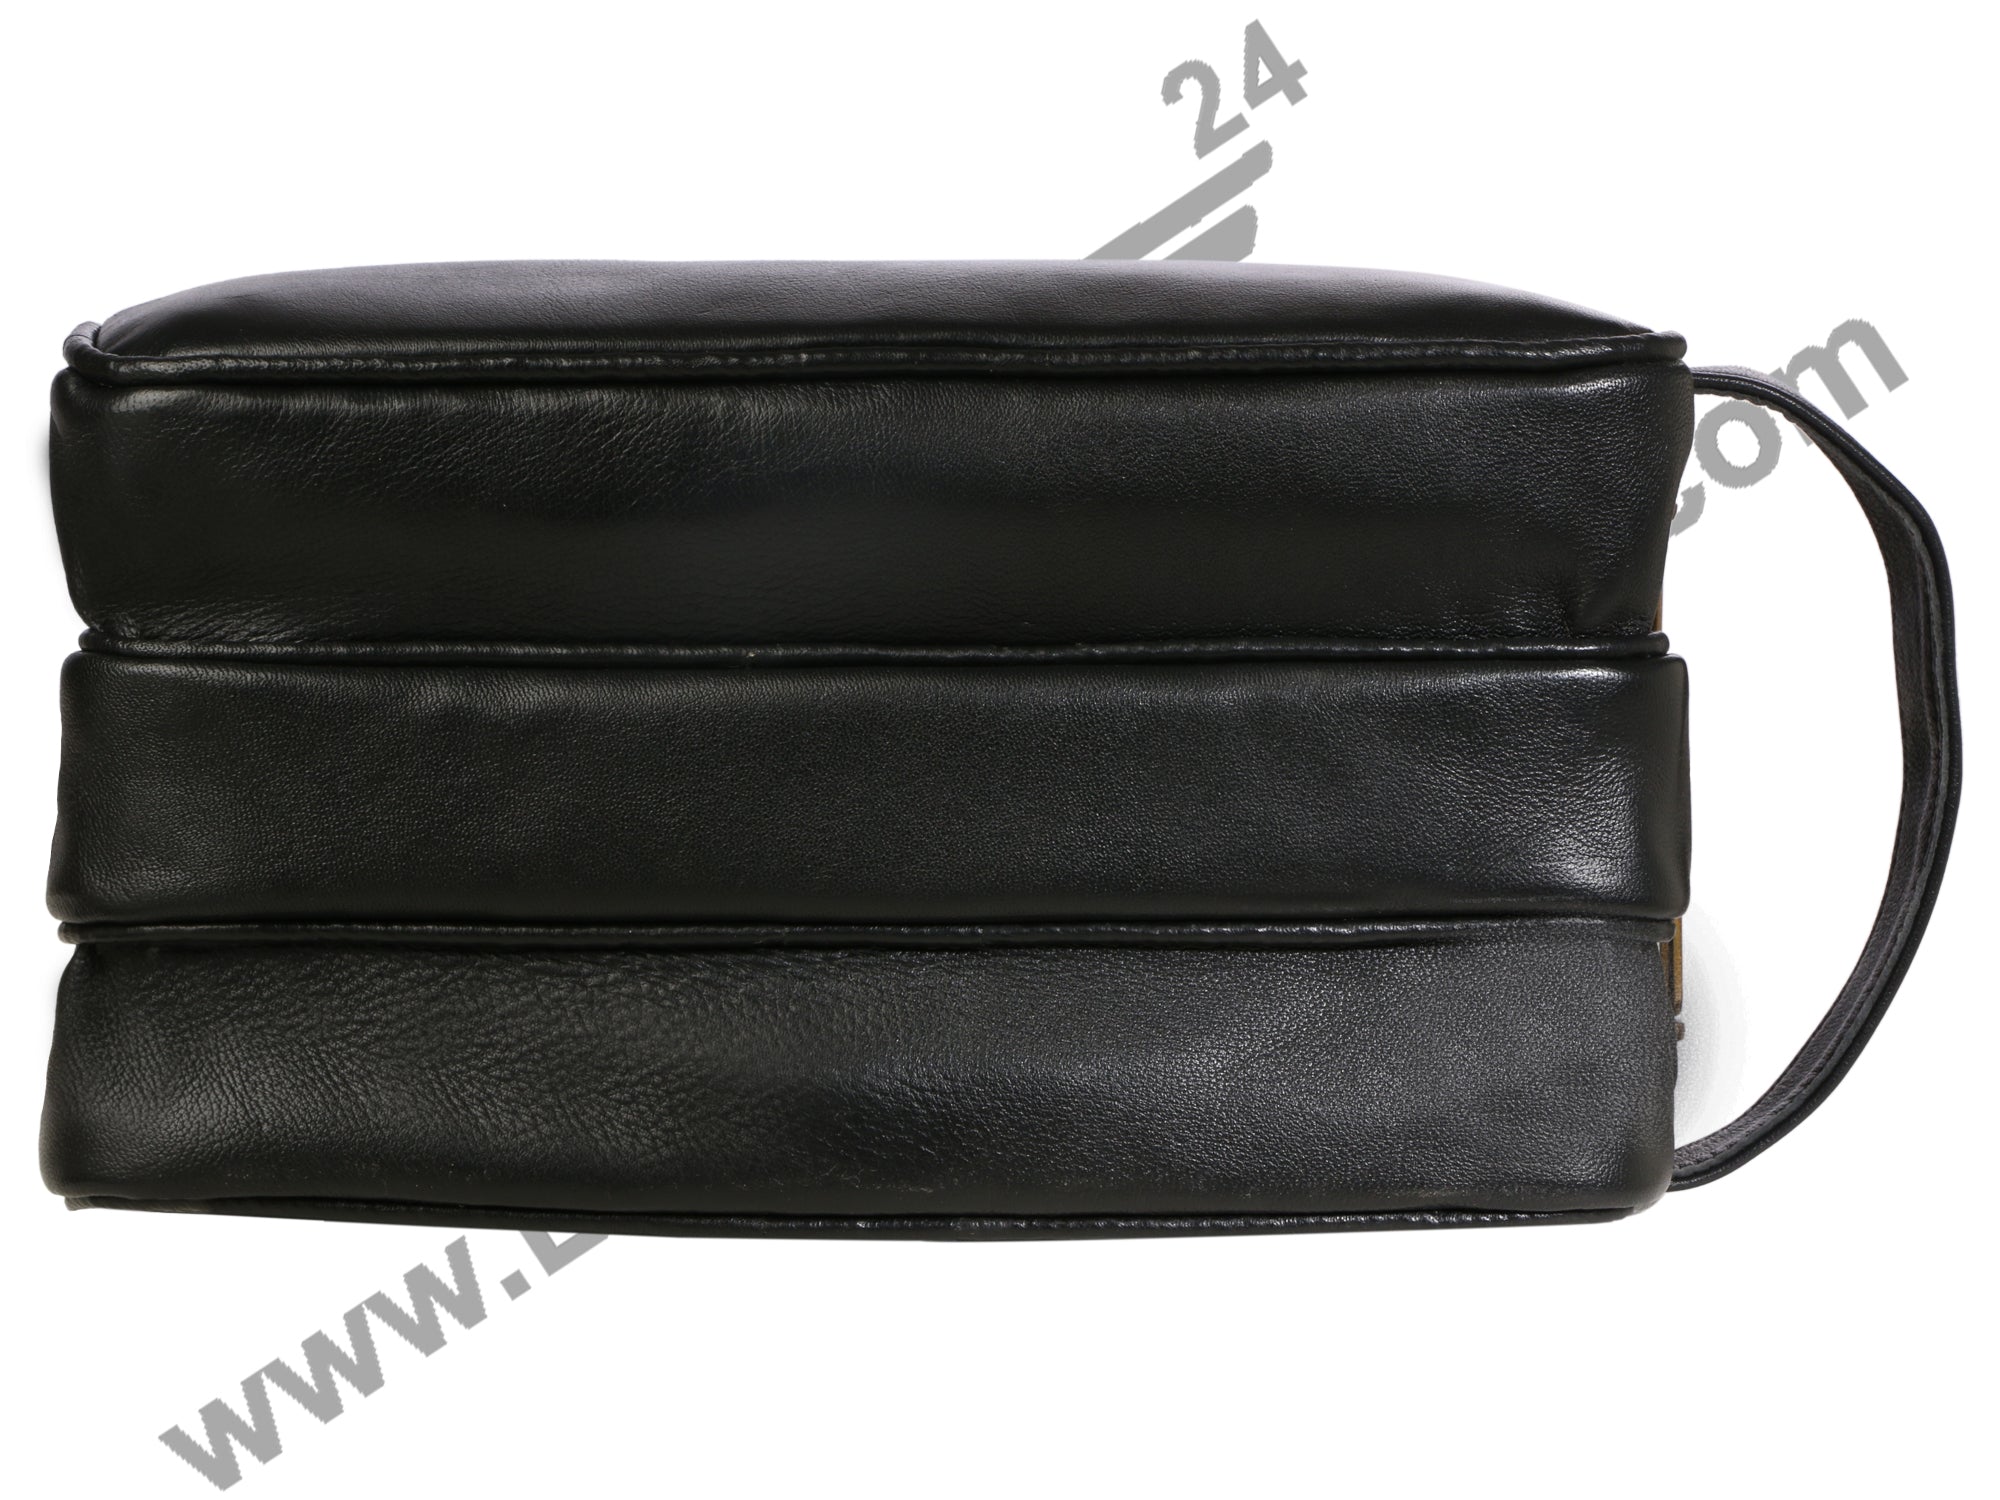 Image of Bottom of 3 Zip Dopp Kit. It is broad enough and very spacious.  A side handle is available, making it convenient in fetching.